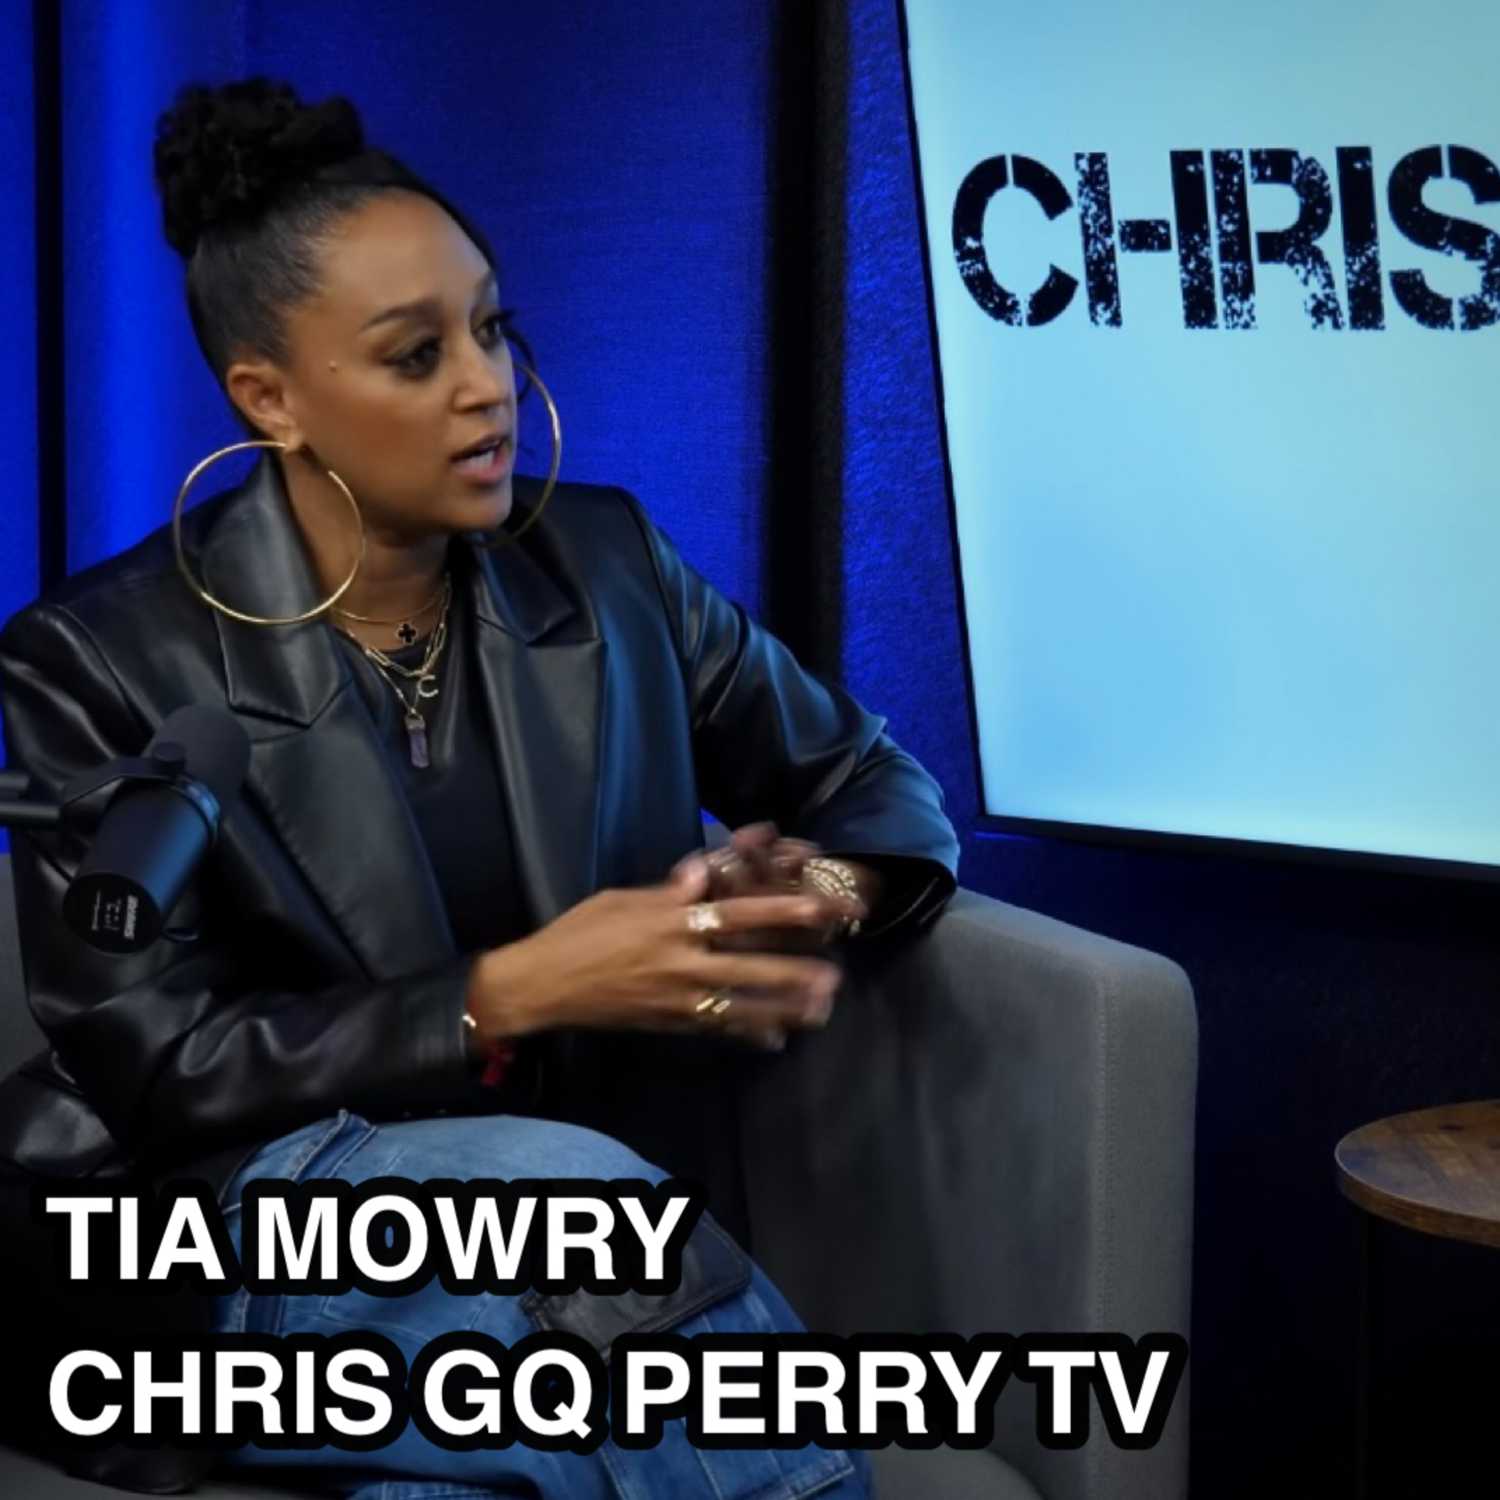 Tia Mowry Opens Up About Self-Love, Personal Growth, and Intimate Relationships!